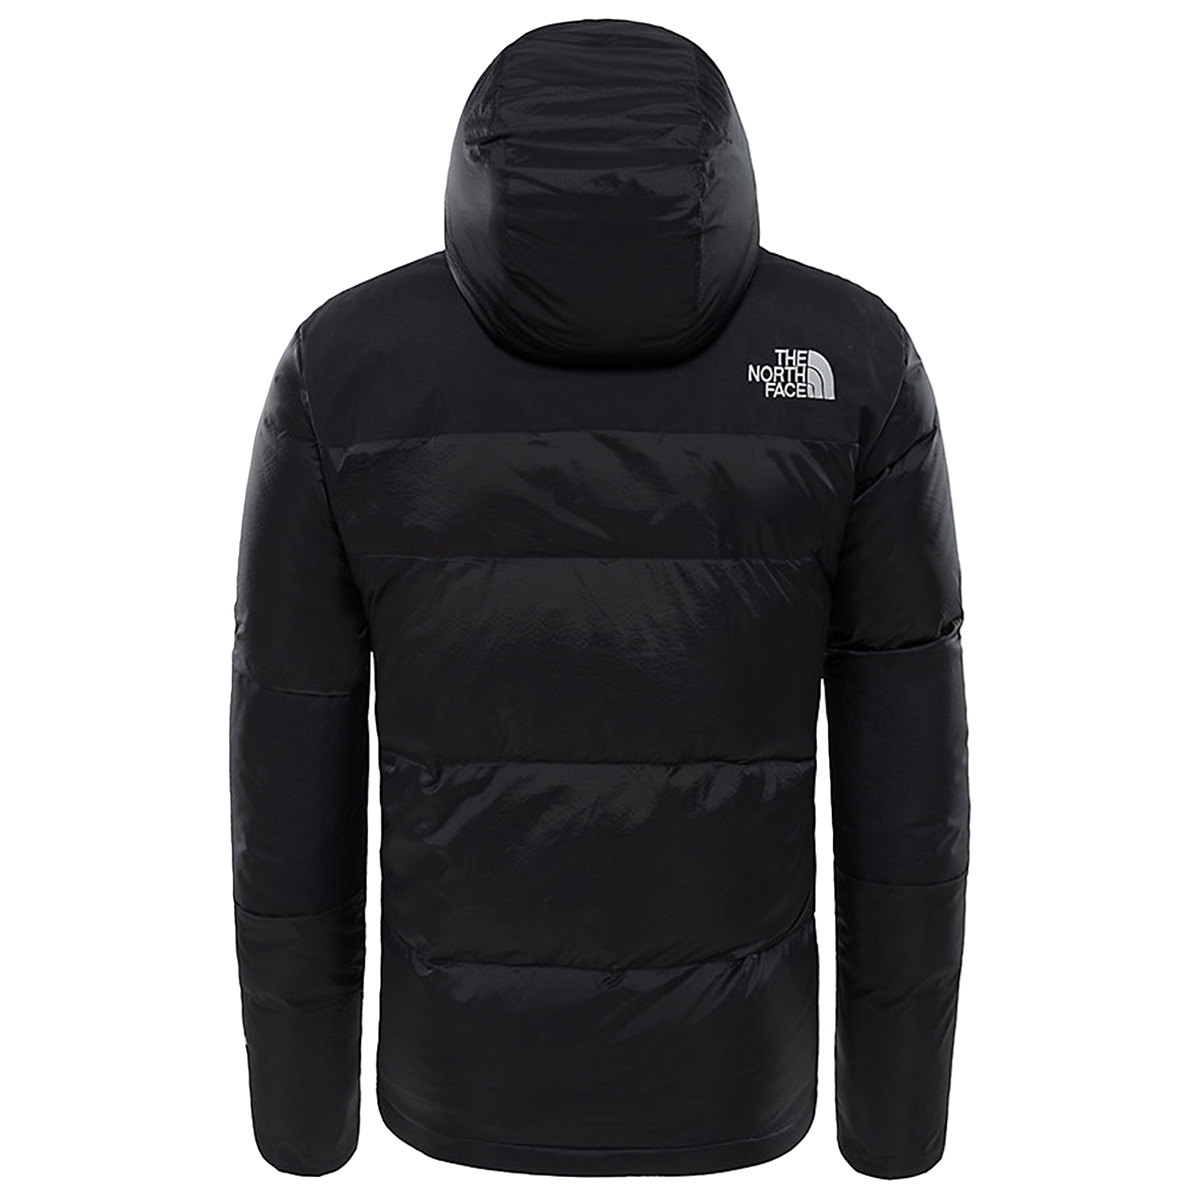 The North Face Men's Himalayan Light Down Hoodie